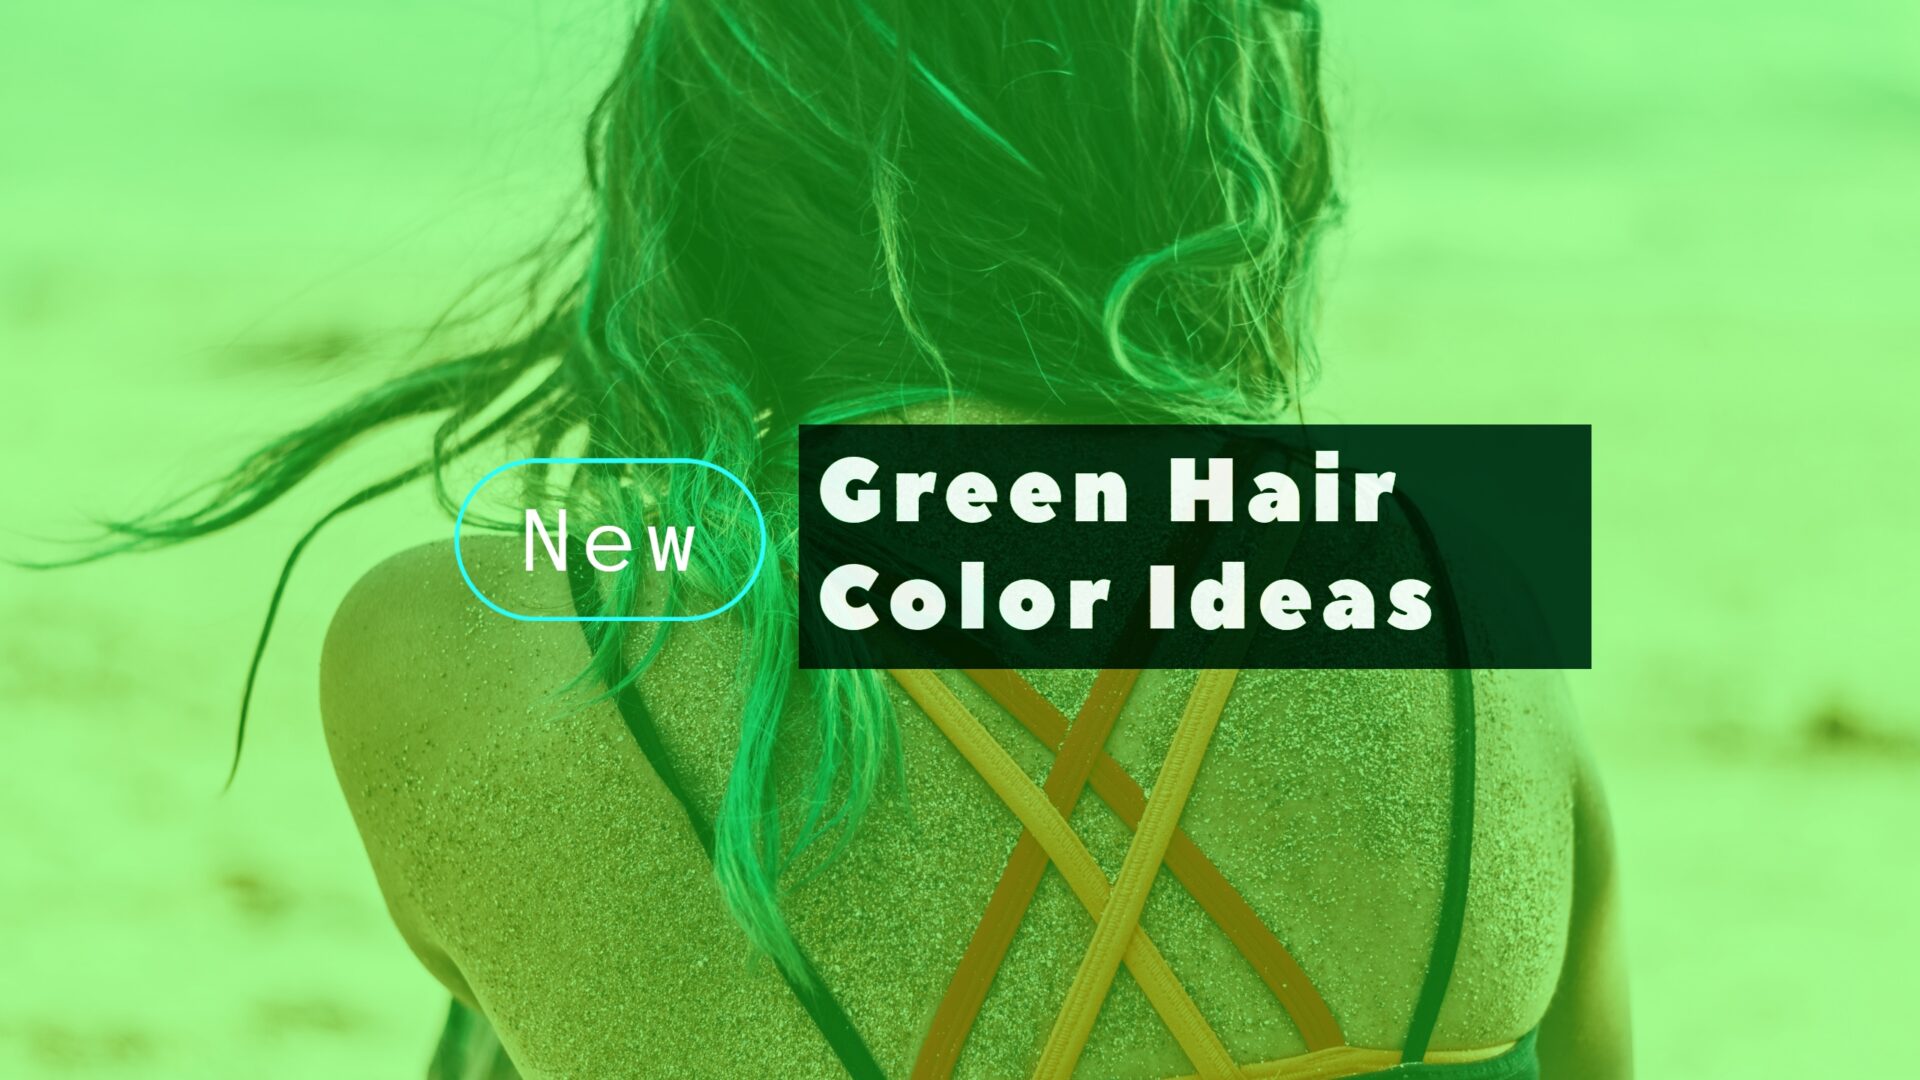 2. 10 Stunning Short Neon Blue Hair Color Ideas for a Bold Look - wide 4